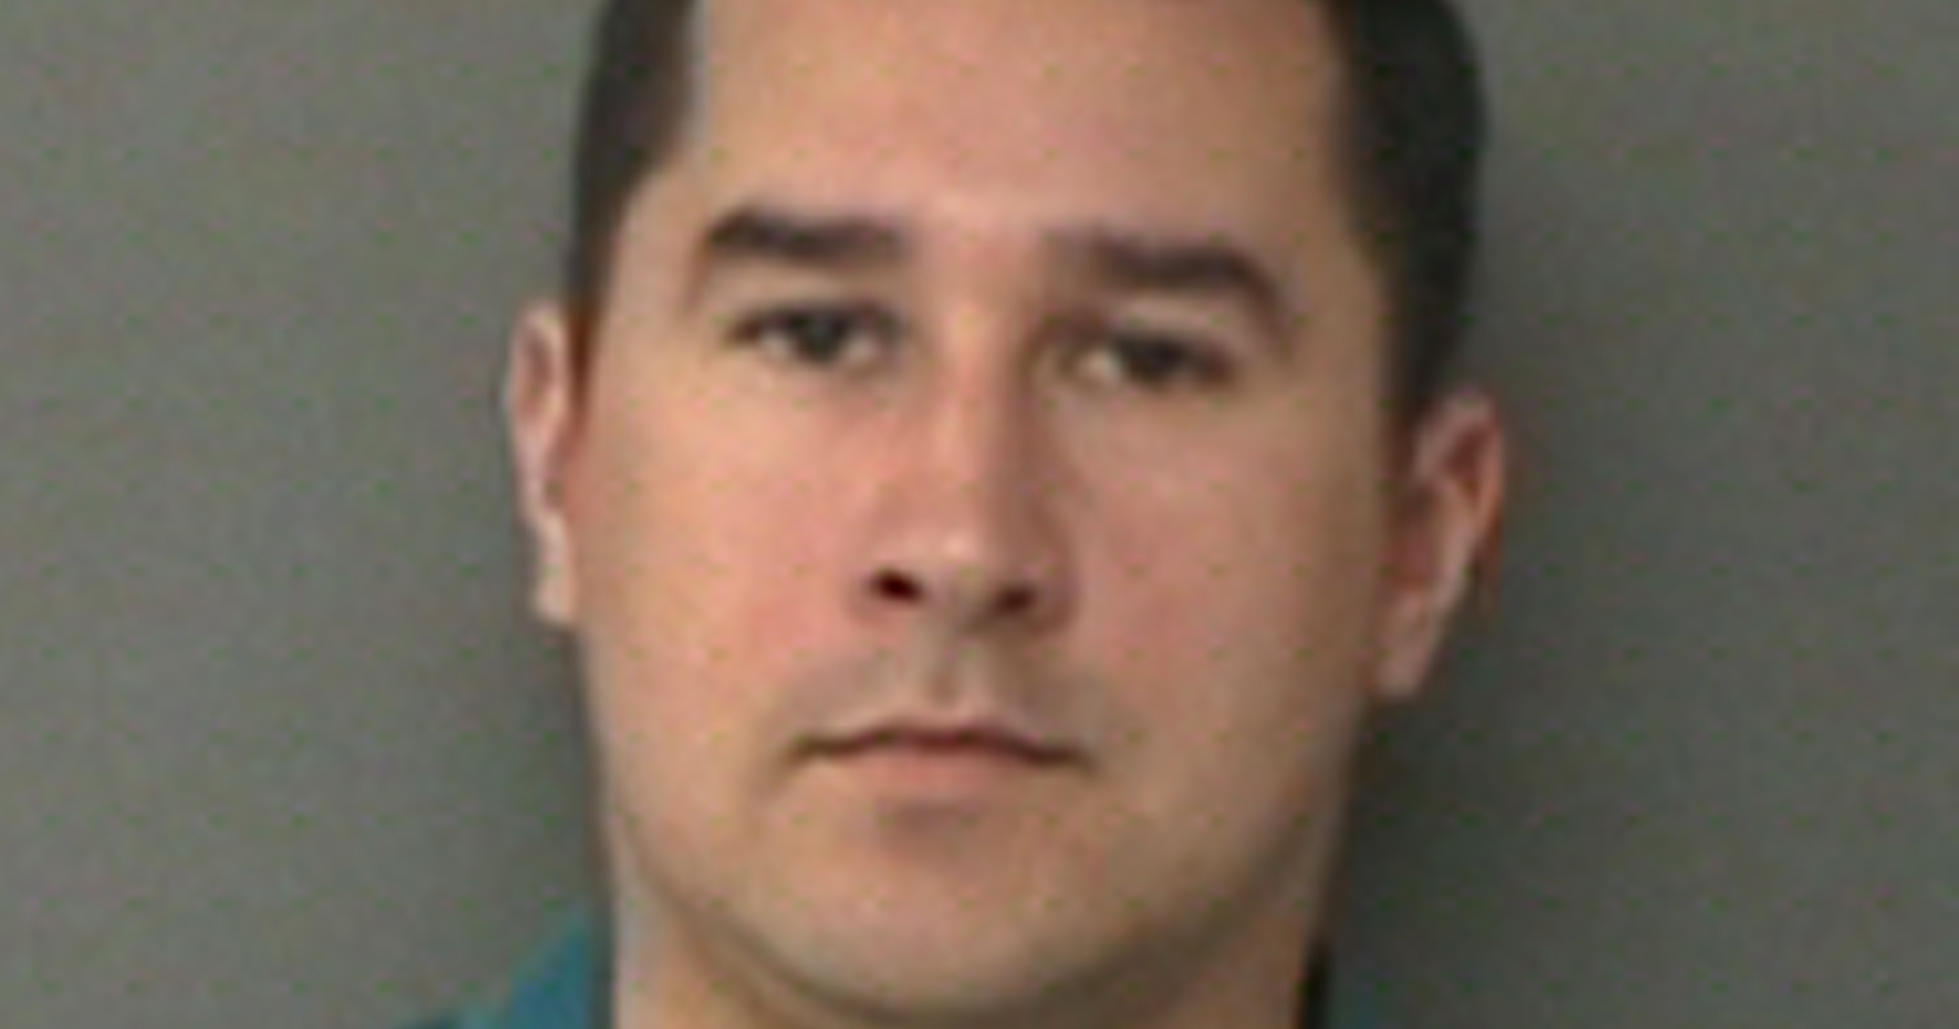 Brian Encinia in a Jan. 7, 2016 file photo released by the Waller County Sheriff’s Office in Hempstead, Texas.